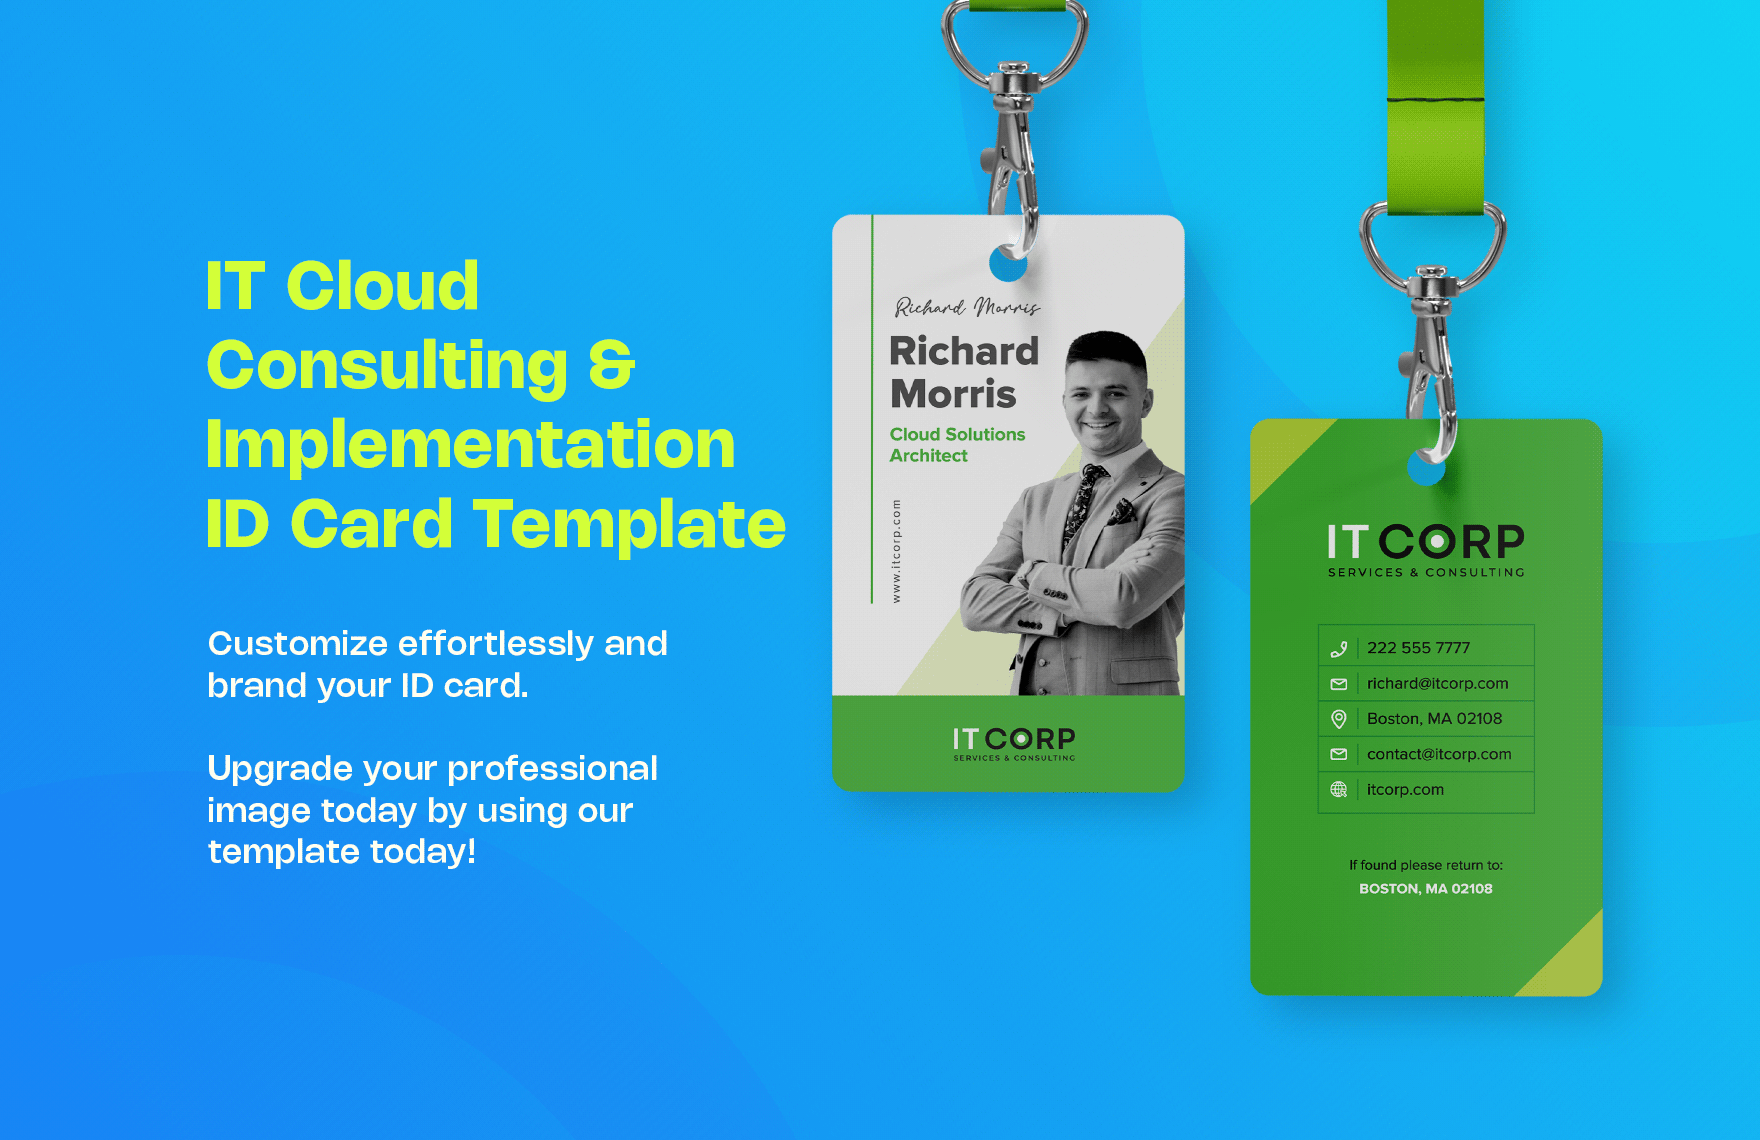 IT Cloud Consulting & Implementation ID Card Template